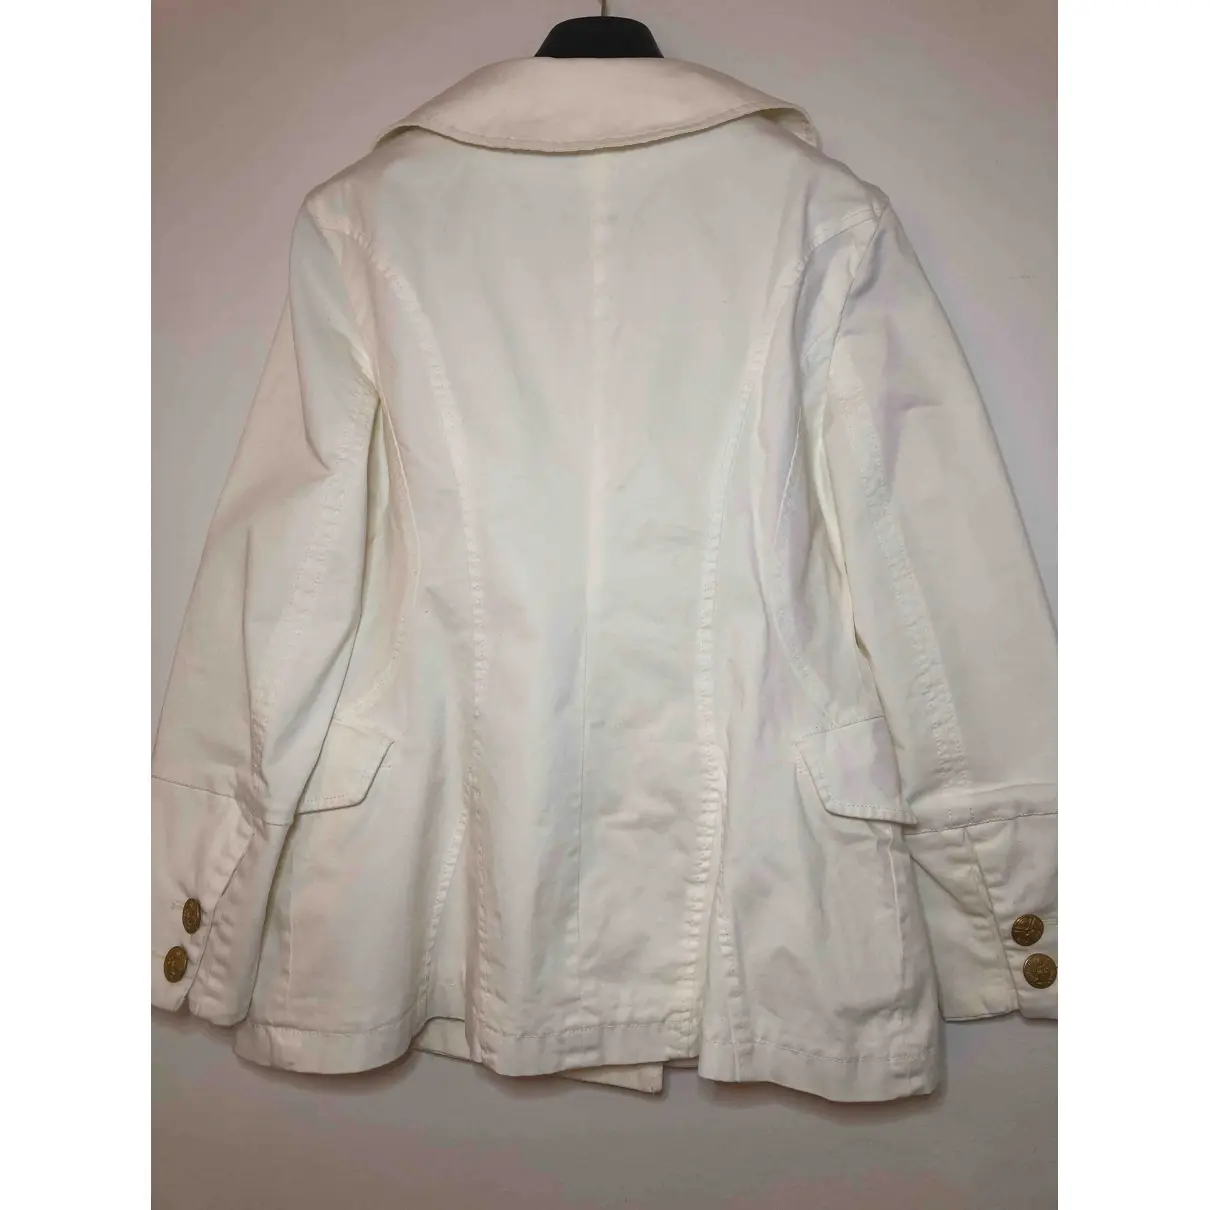 Buy History Repeats White Cotton Jacket online